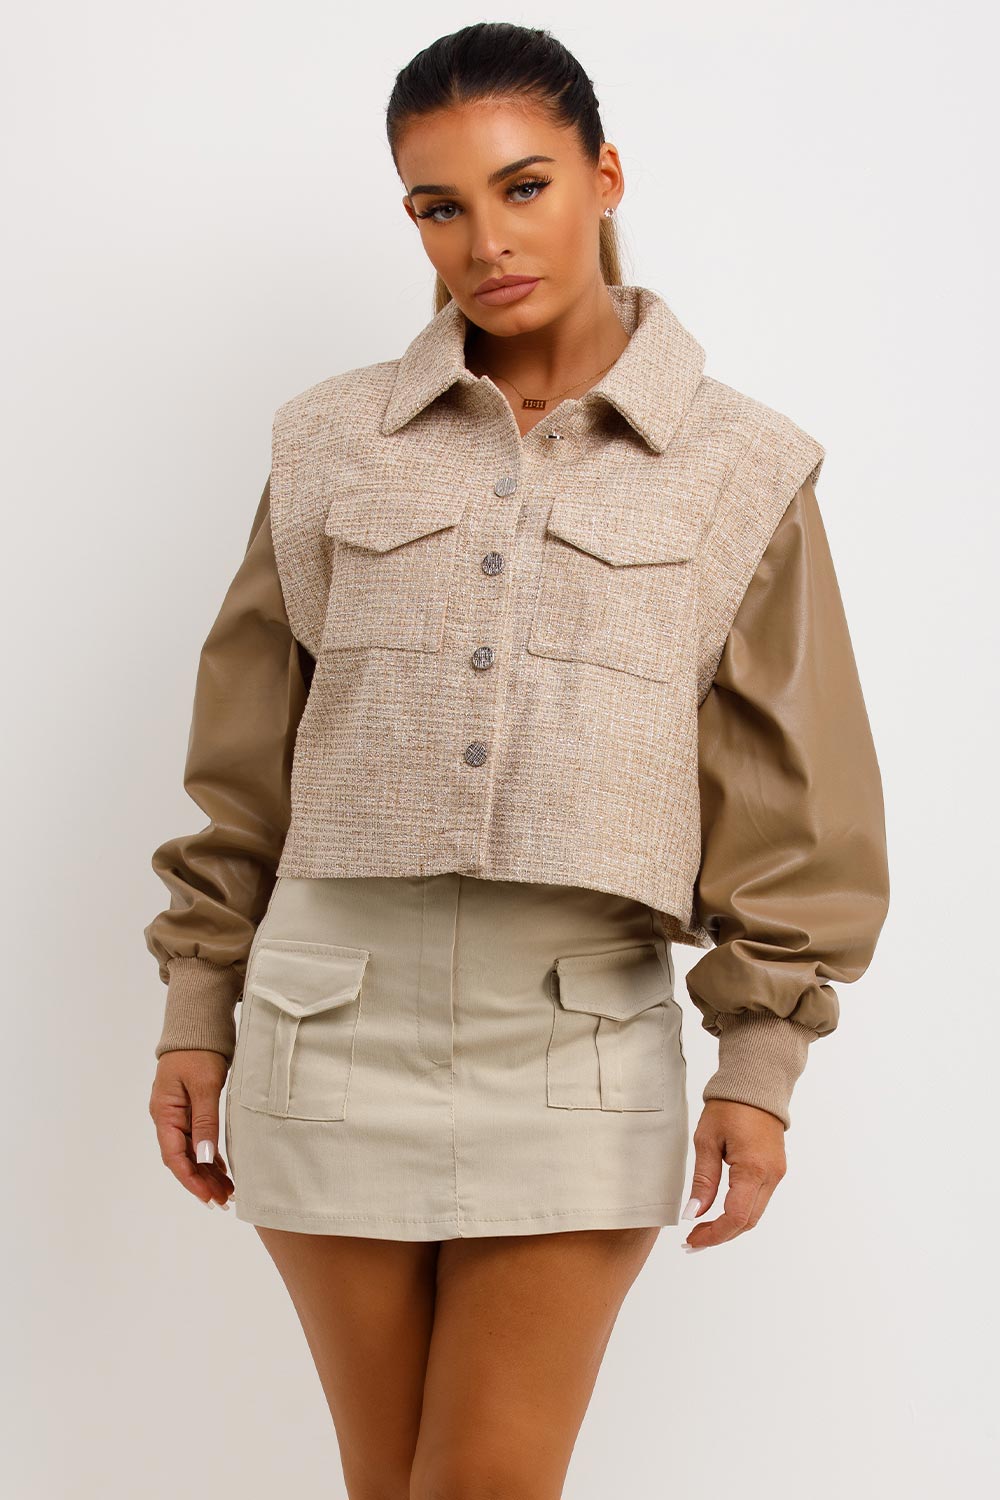 womens tweed bomber jacket with faux leather sleeevs